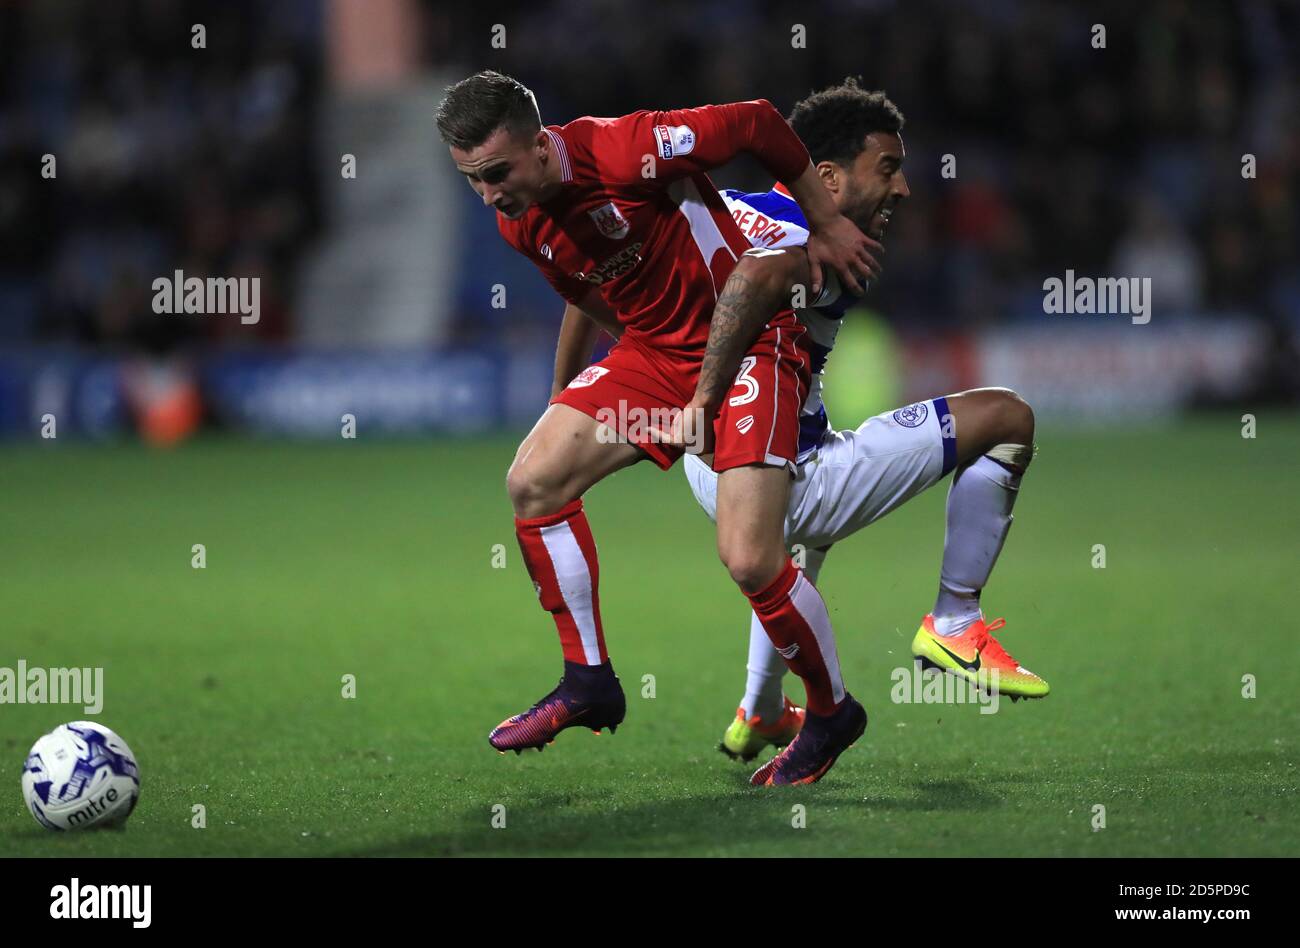 Bristol City's Joe Bryan, (left) battles for the ball with Queens Park Rangers' James Perch, (right) Stock Photo